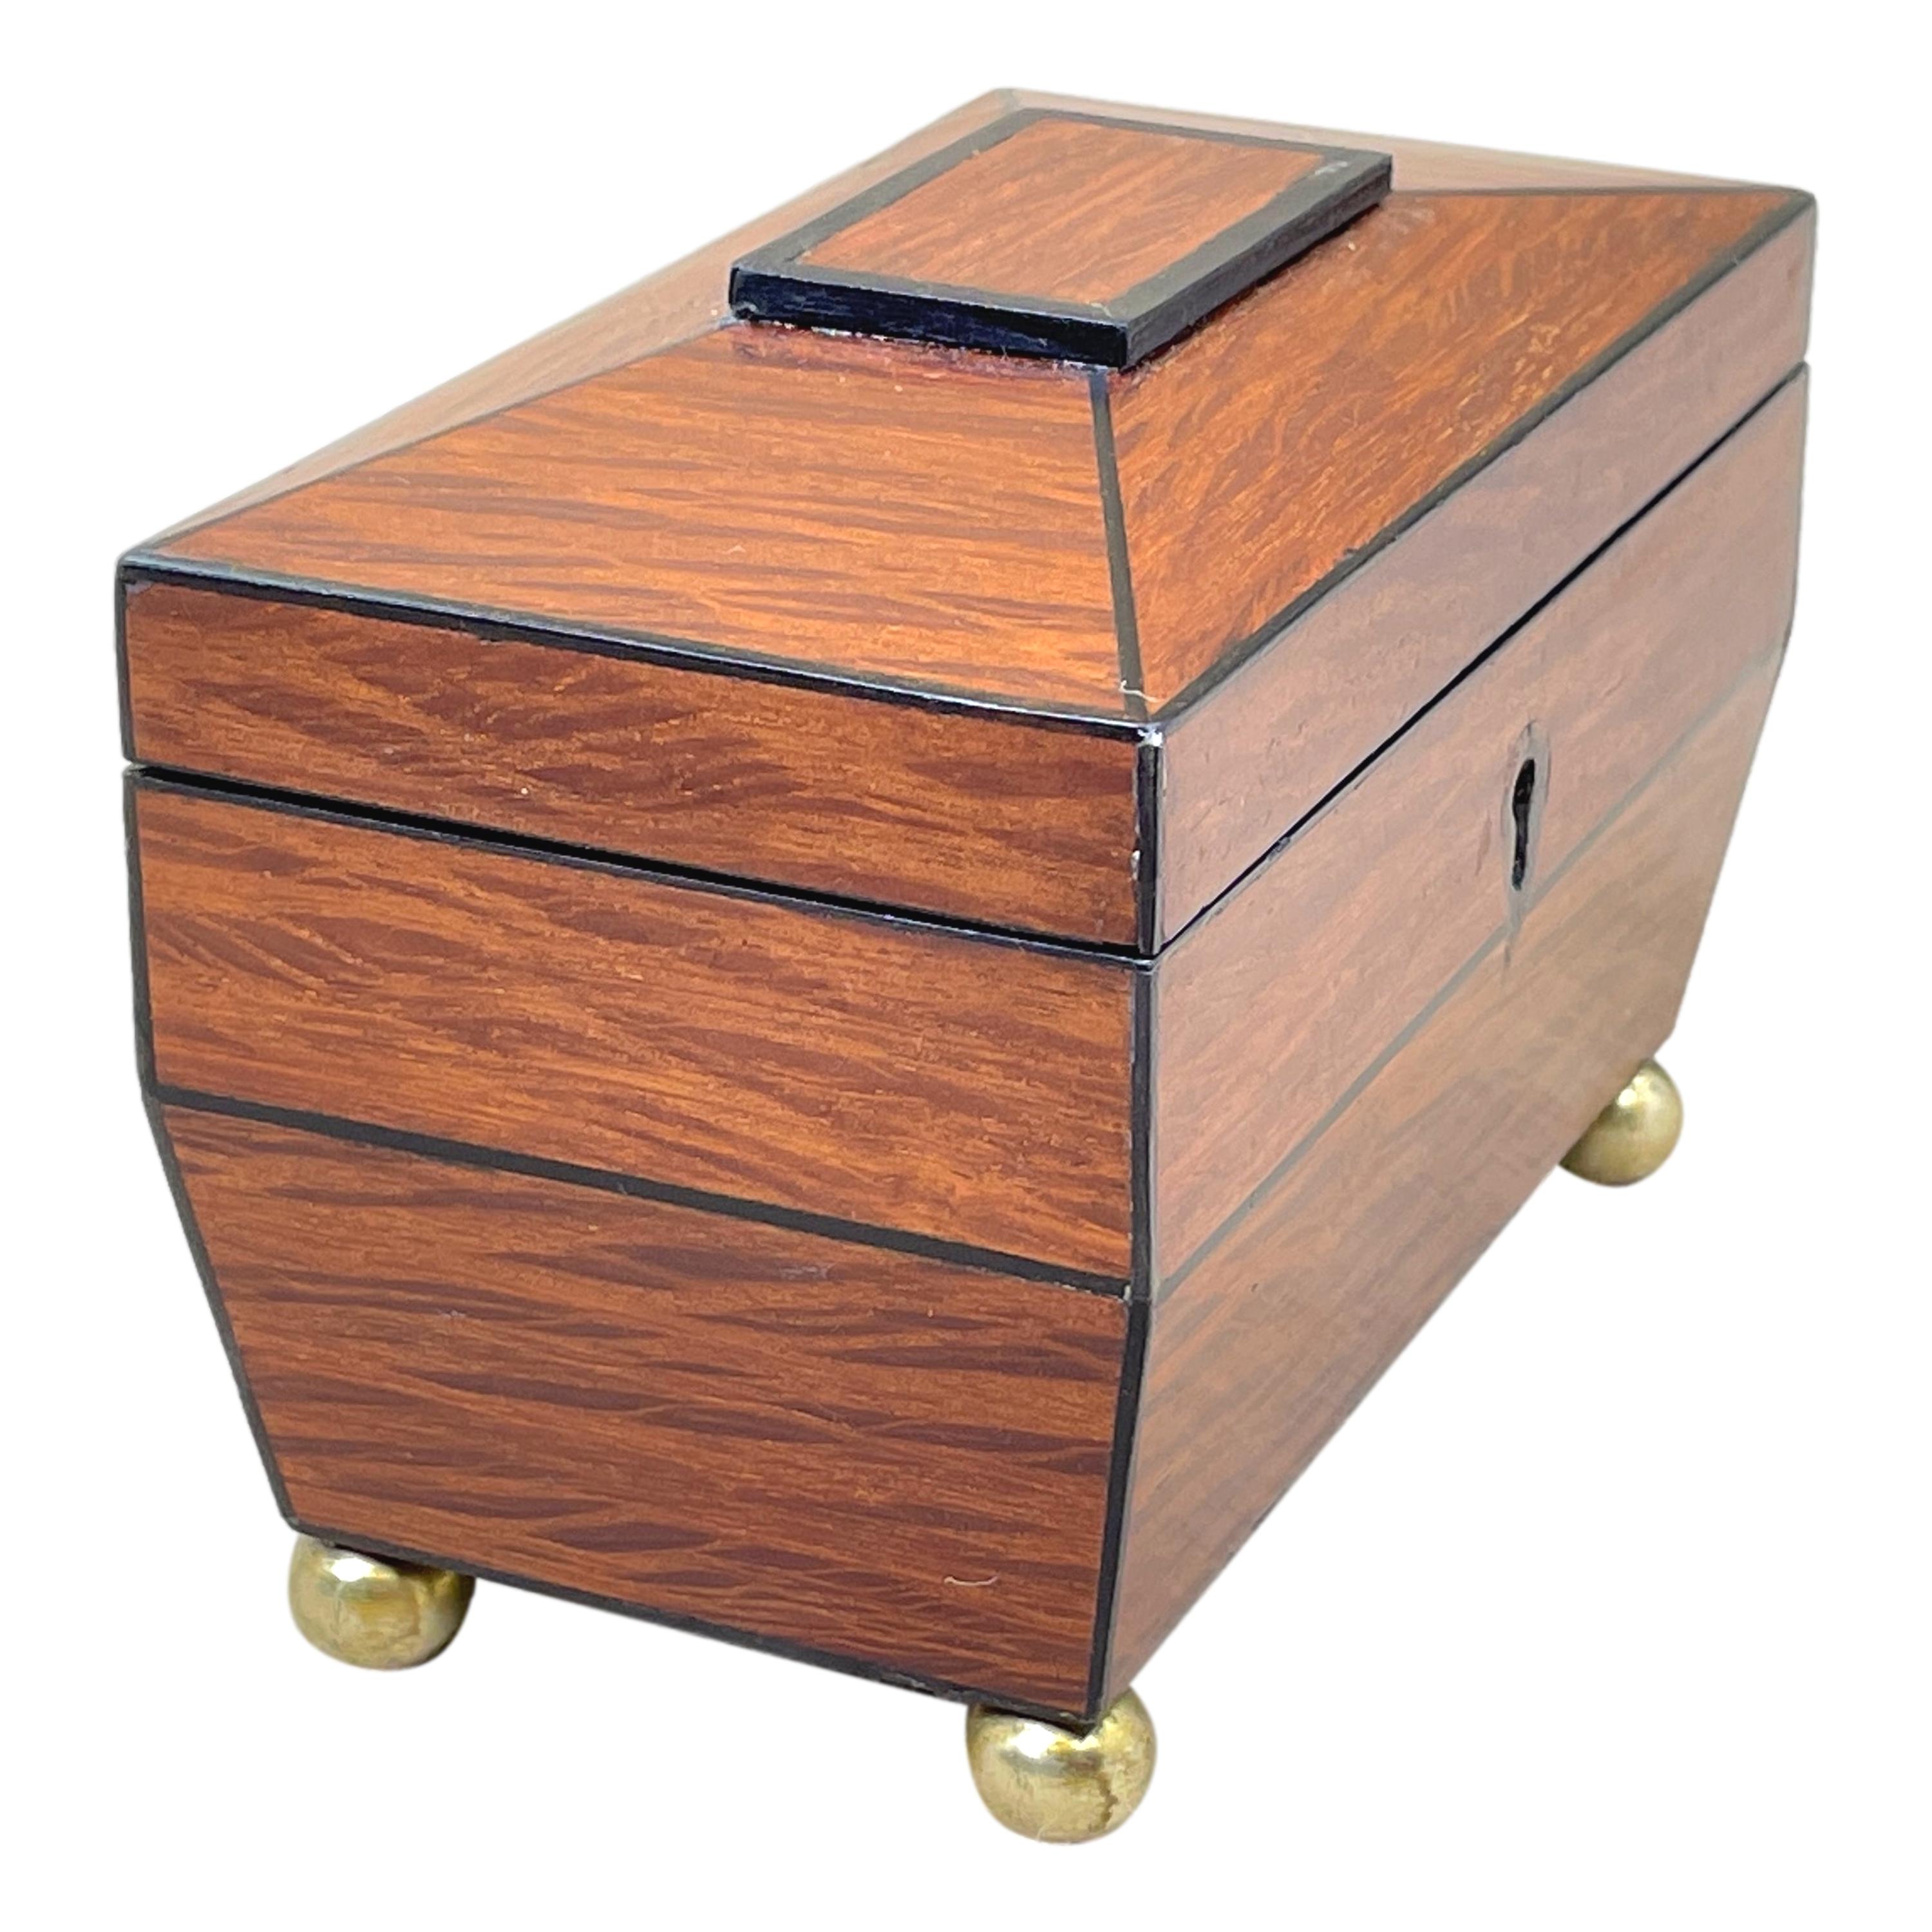 Tiny Regency Partridgewood Tea Caddy In Good Condition For Sale In Bedfordshire, GB